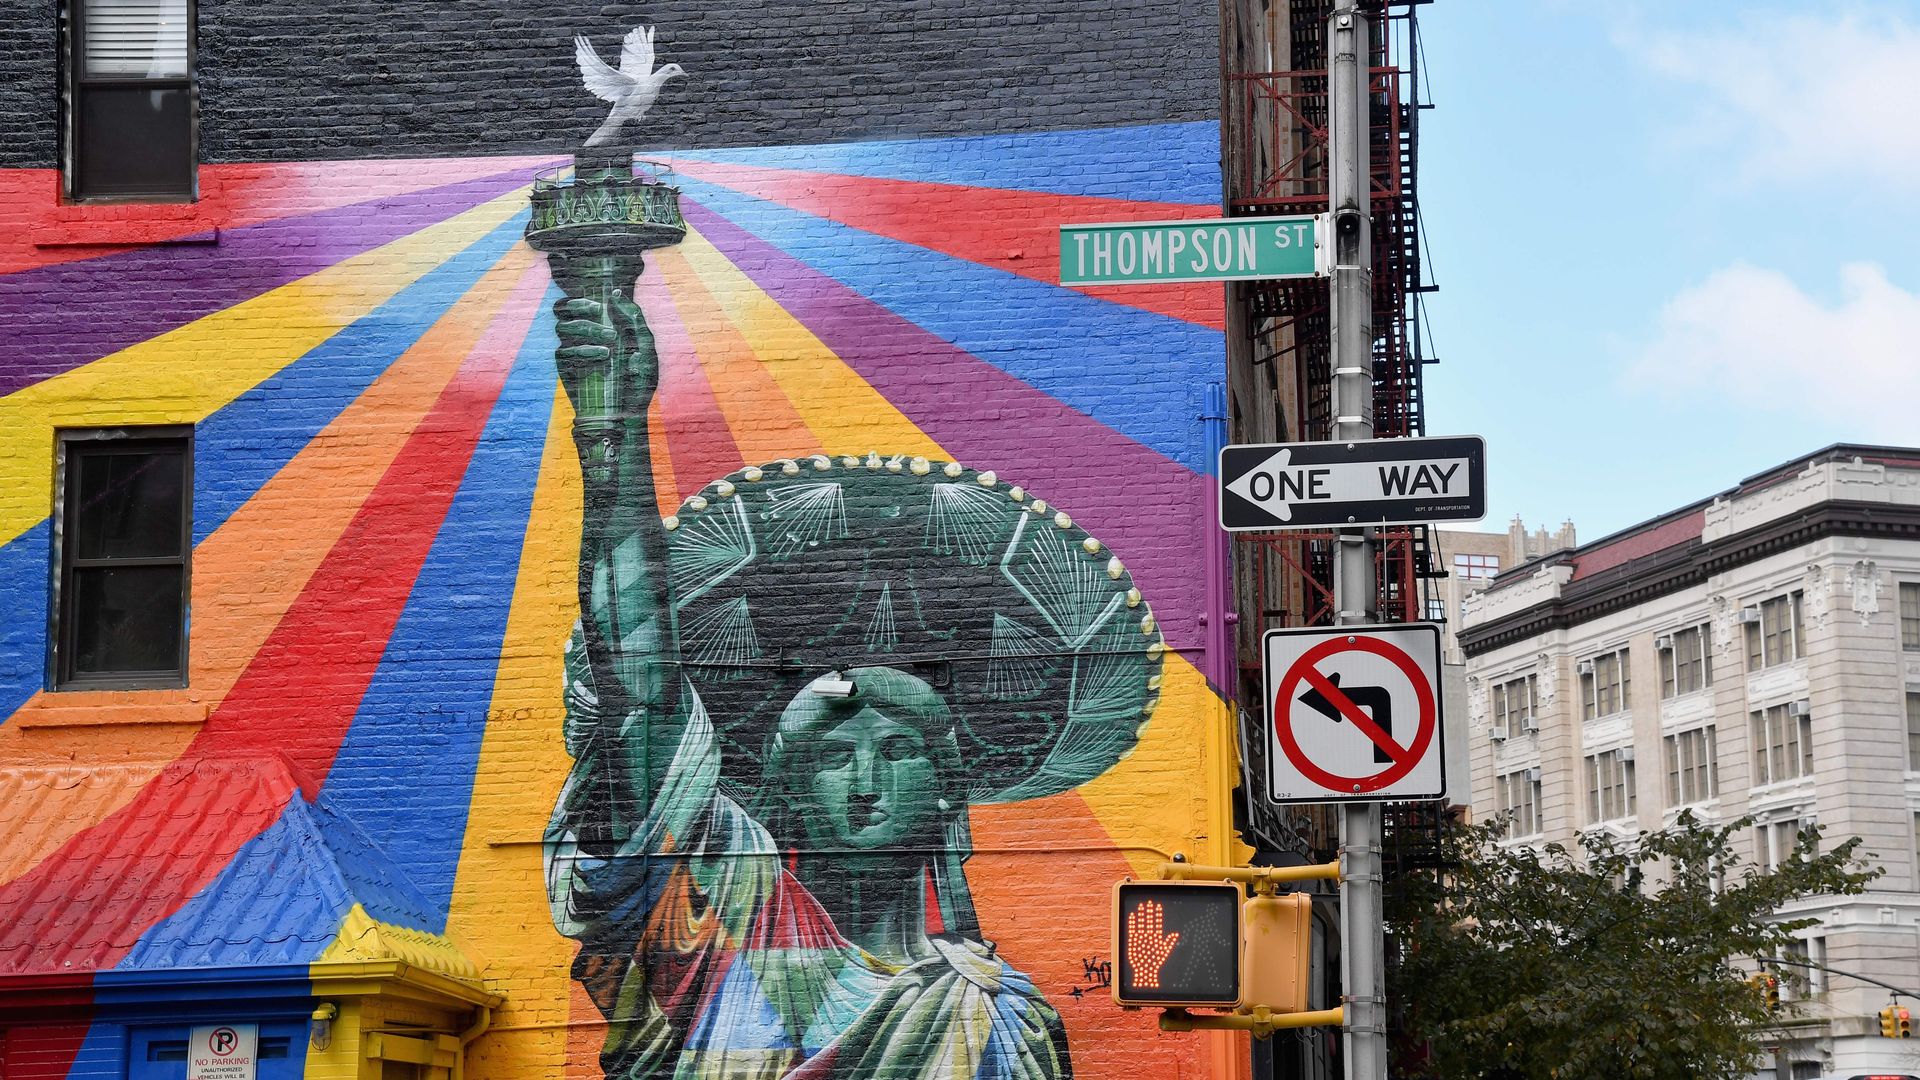 A colorful mural painted on a wall in New York City of the Statue of Liberty